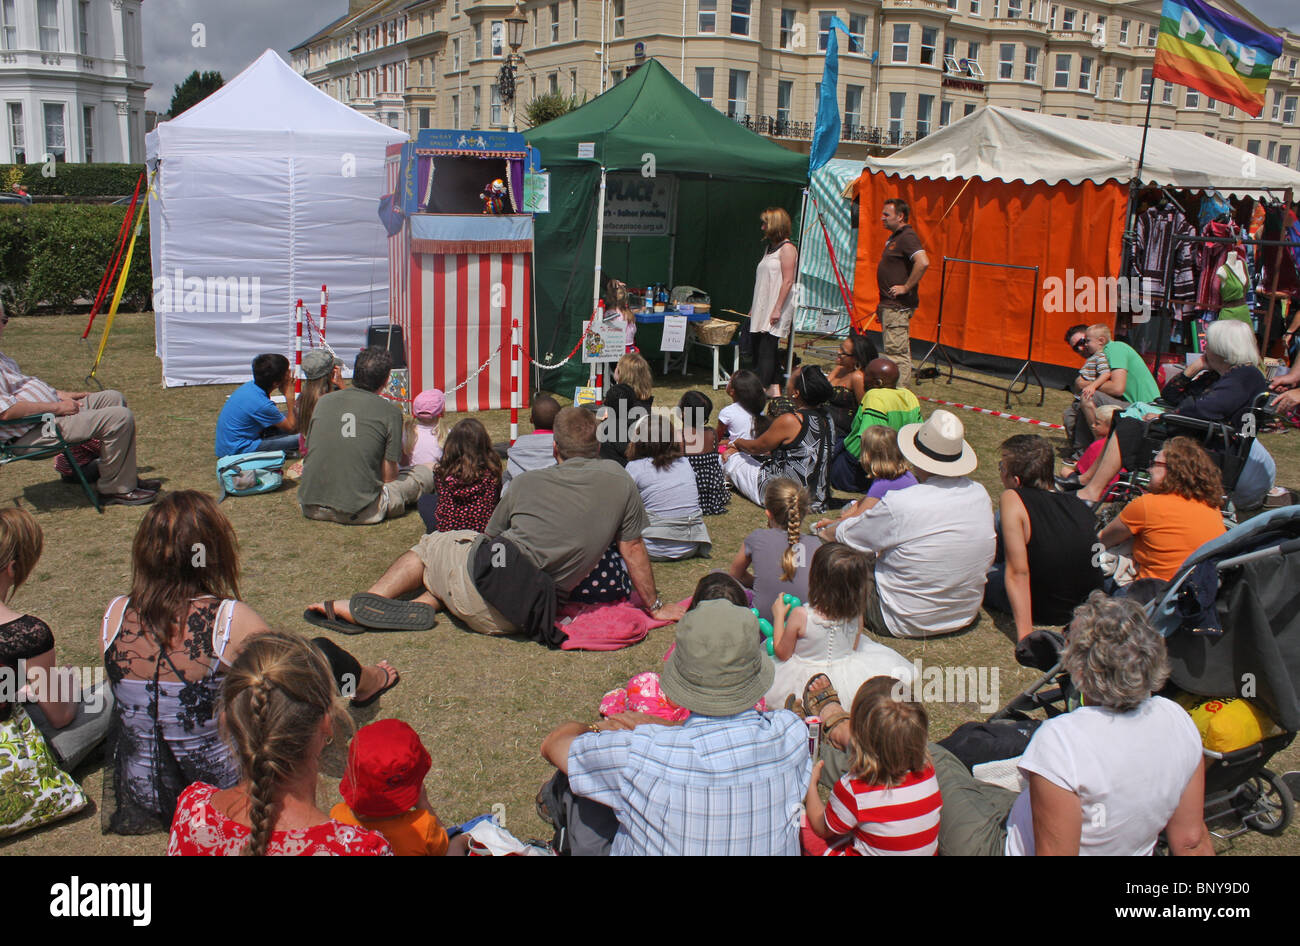 Punch and Judy show in Eastbourne, East Sussex. Stockfoto